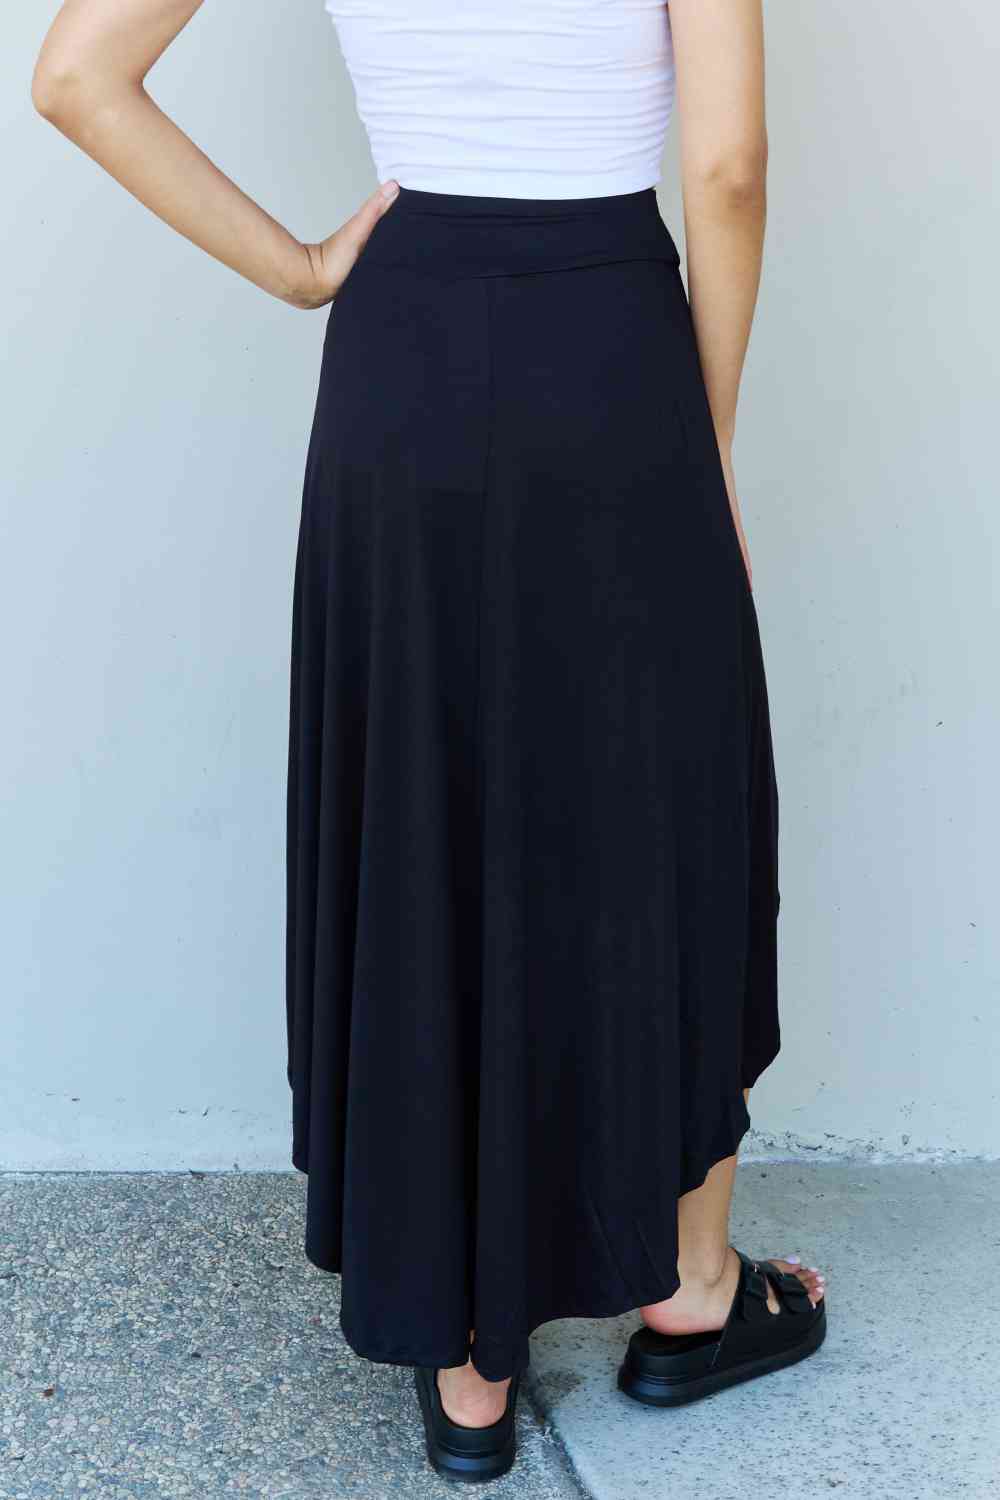 Ninexis First Choice Black  High Waisted Flare Maxi Skirt in Black